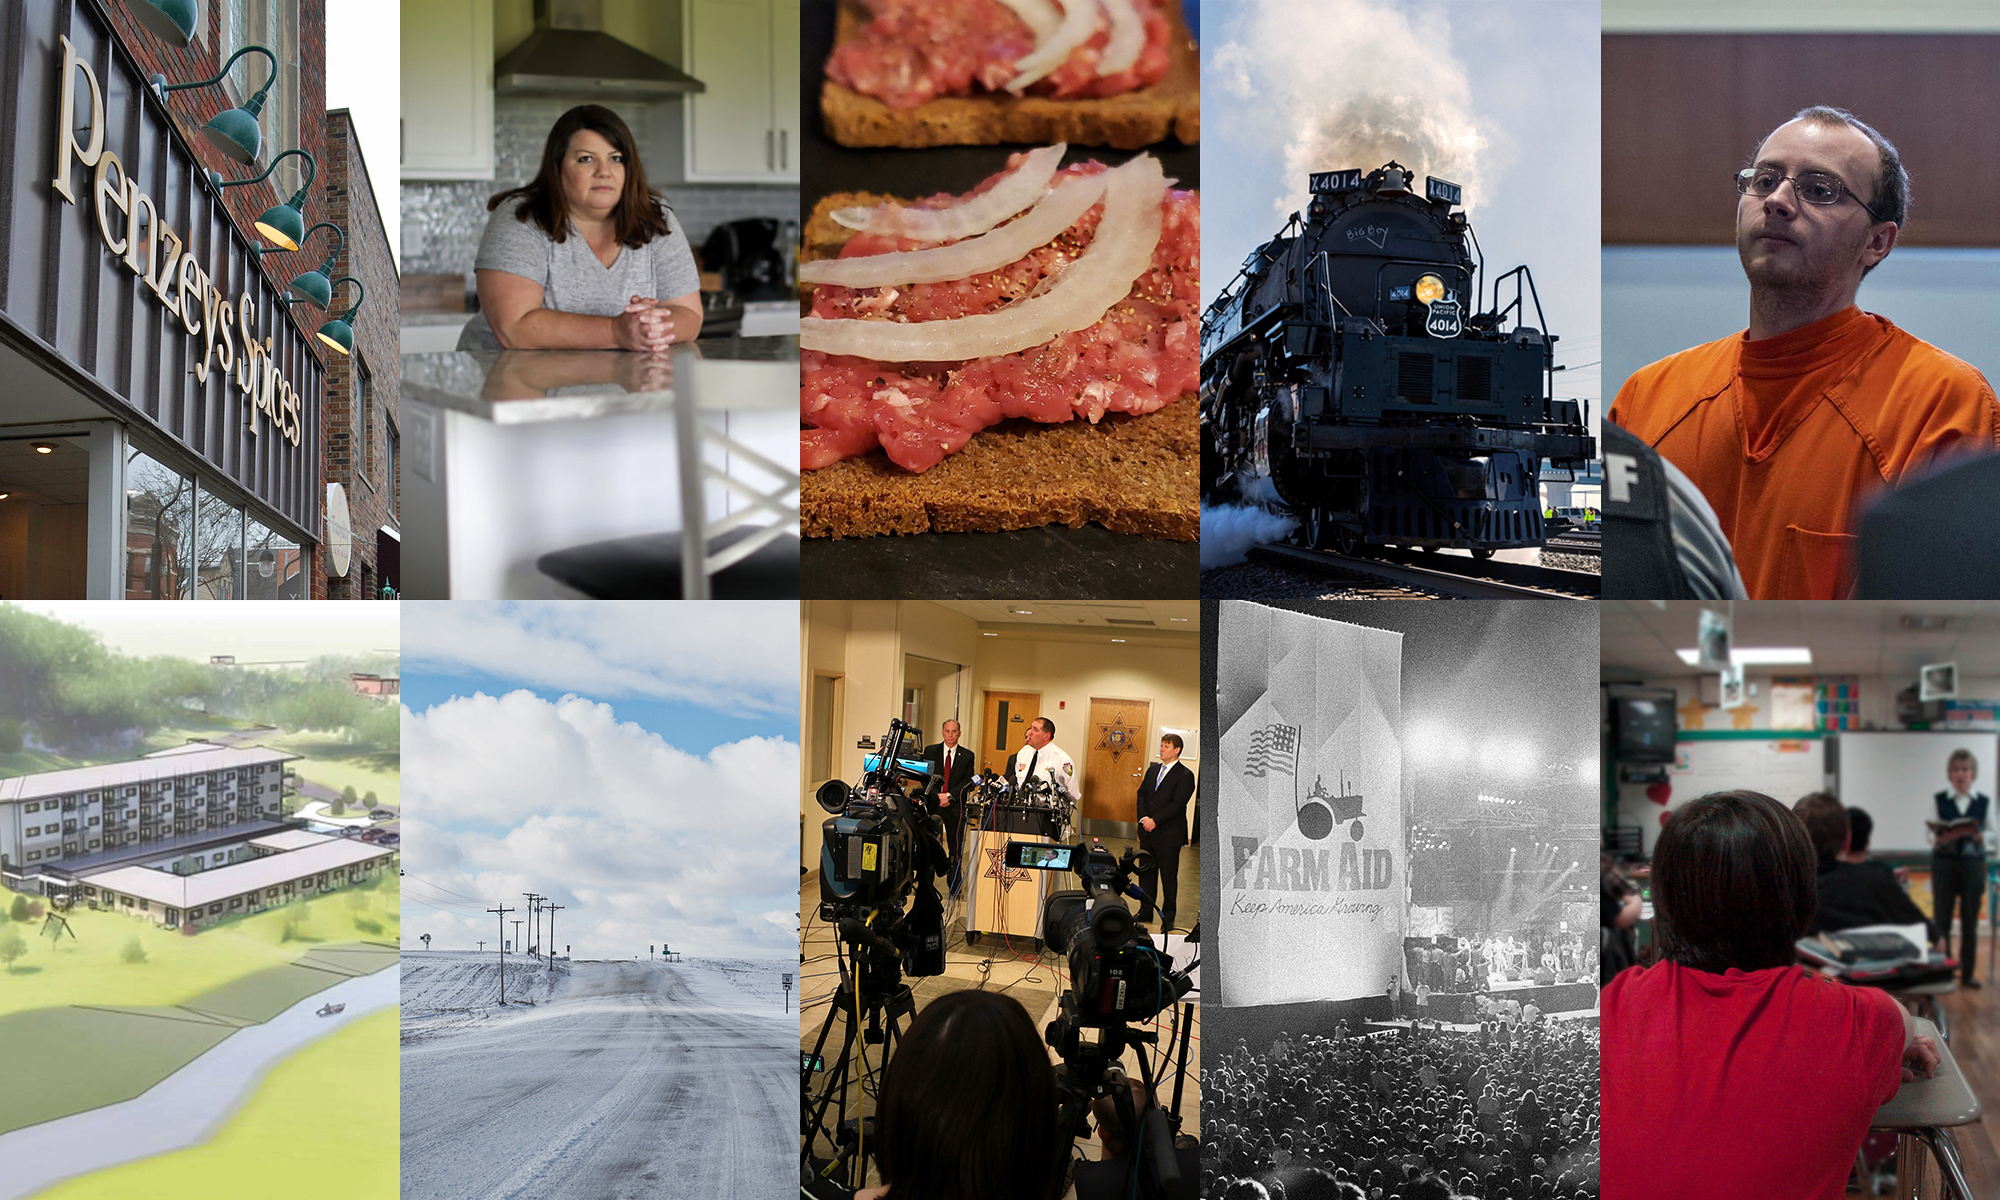 WPR’s 10 Most-Read Stories Of 2019